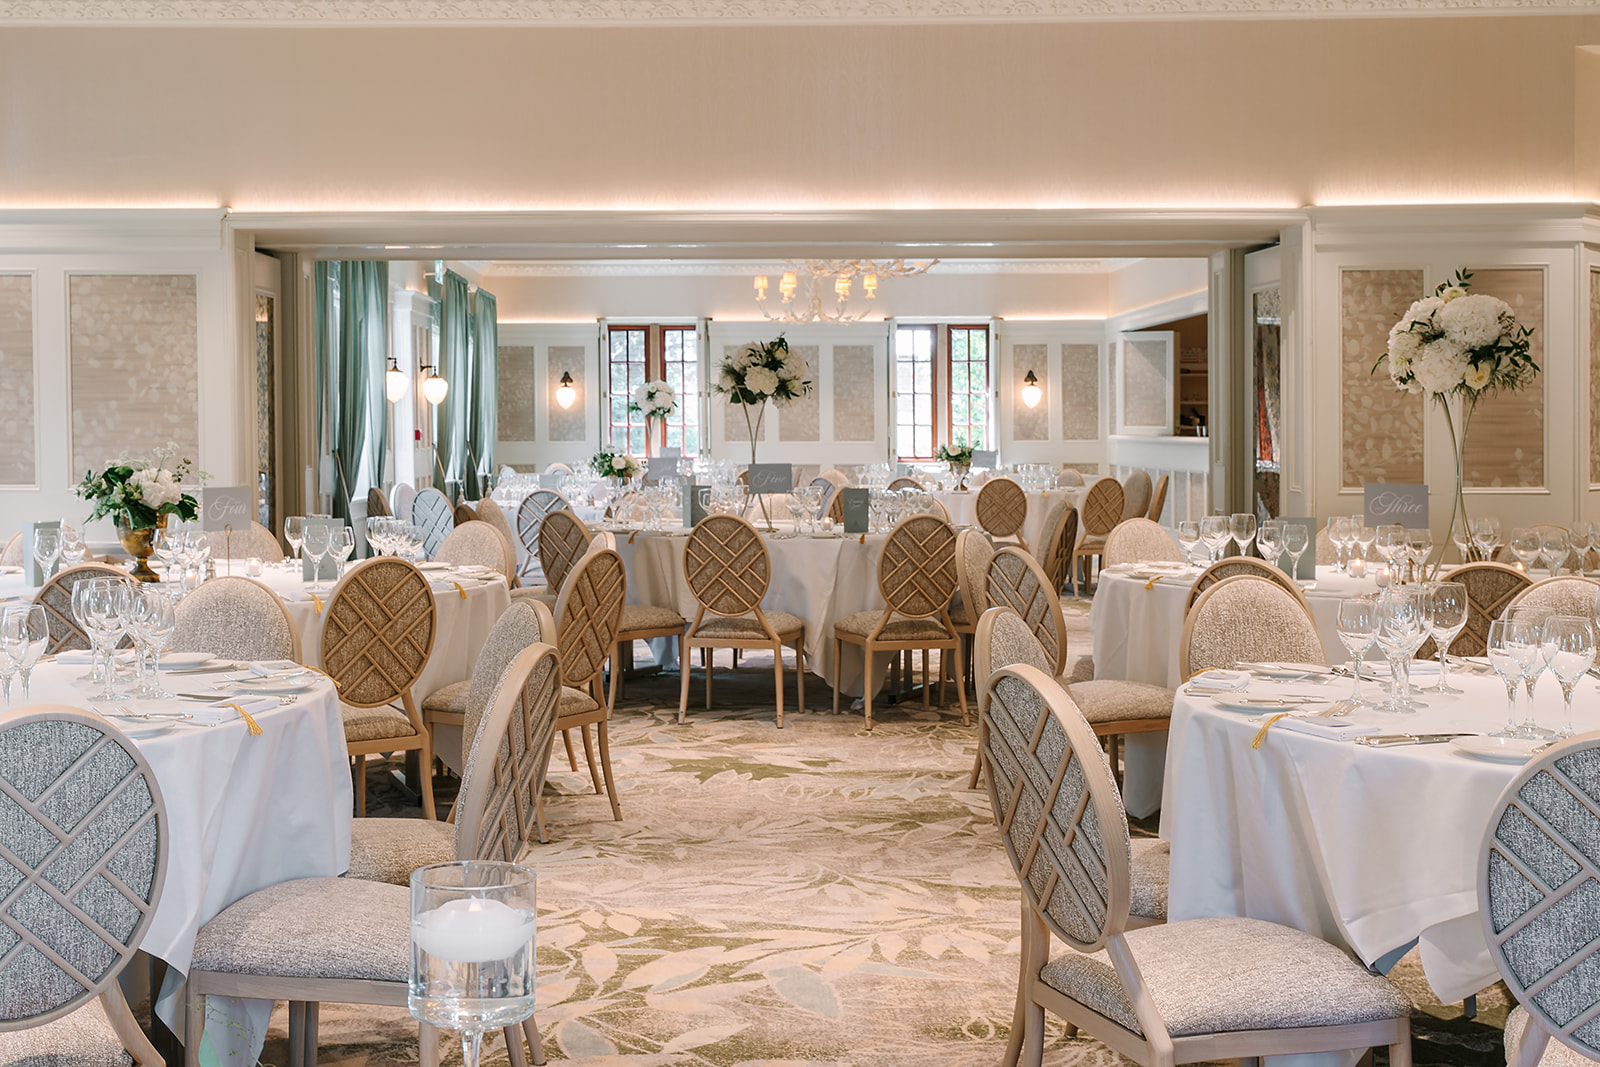 Image of the Parkview wedding suite at Pennyhill Park Hotel in Surrey with tables laid ready for a wedding breakfast.